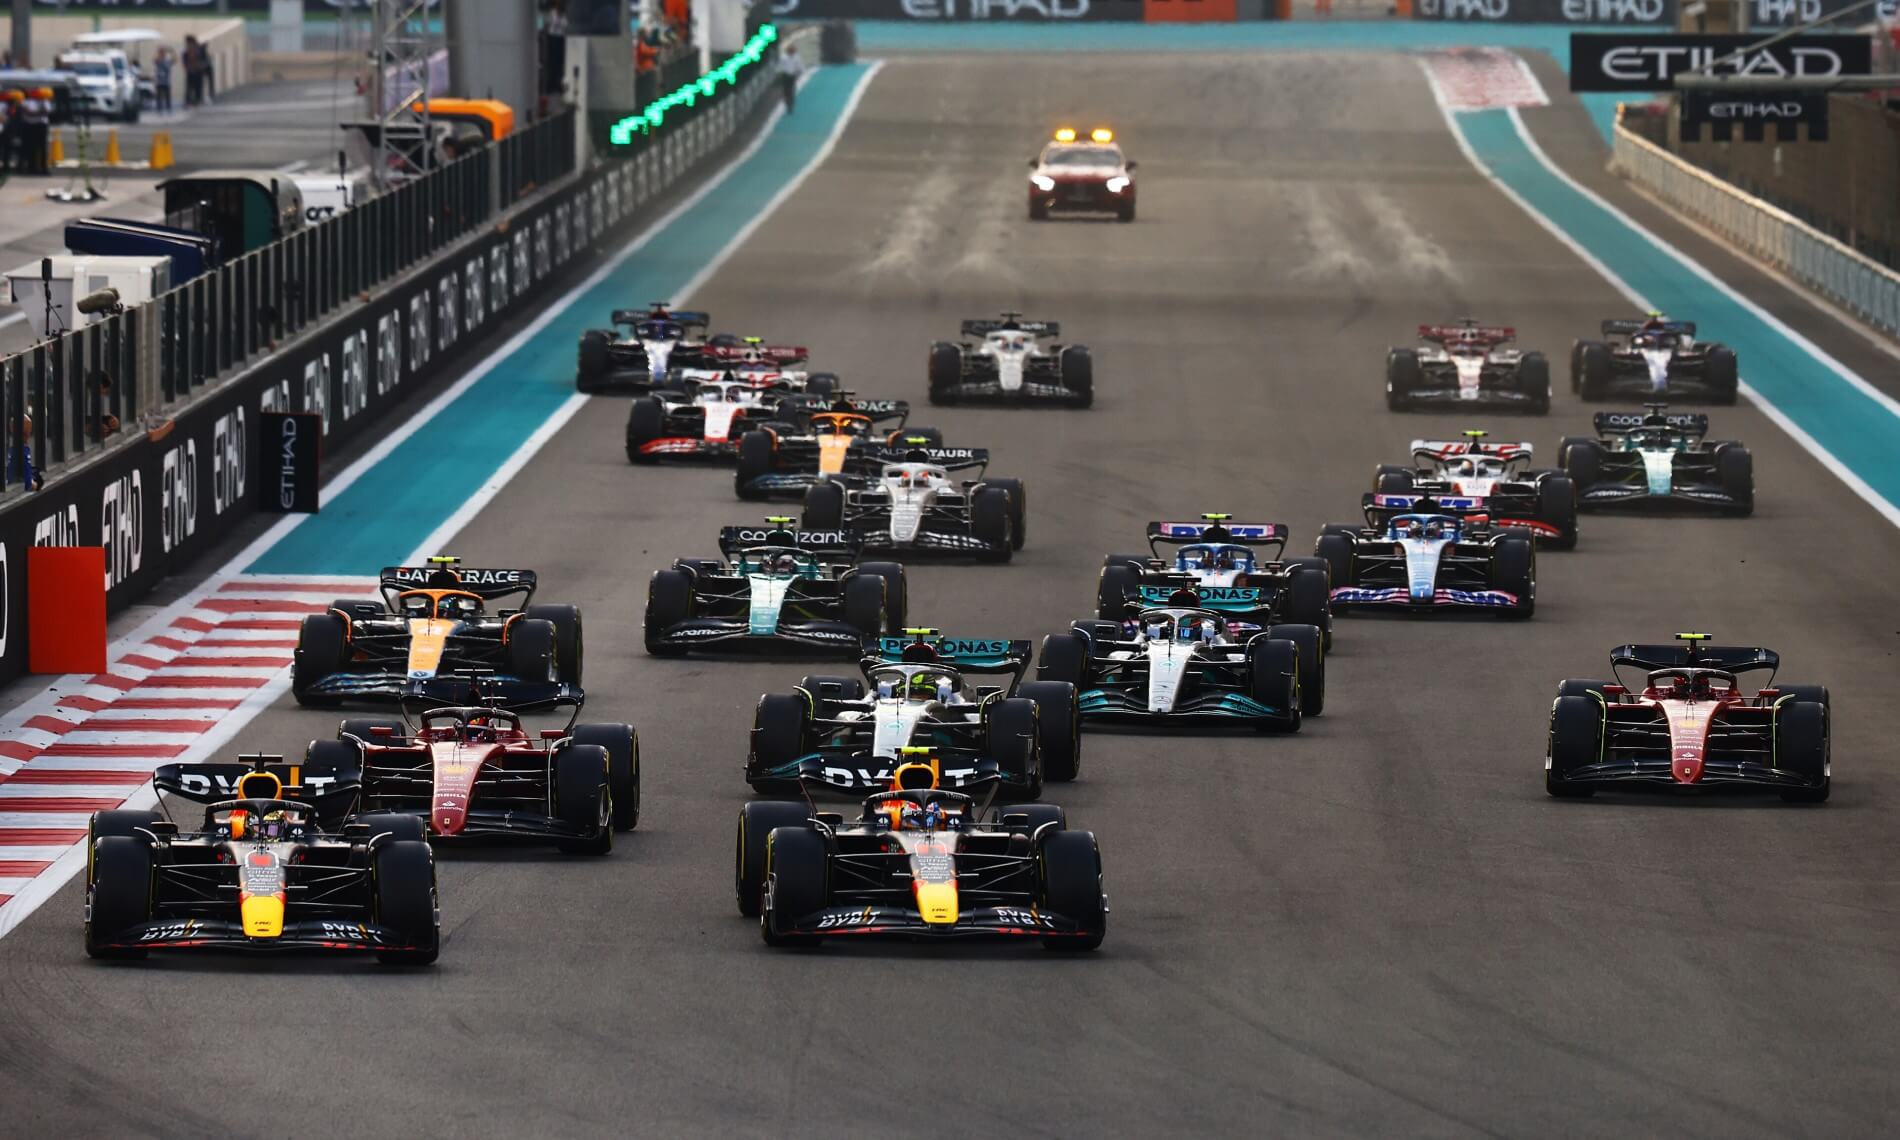 F1 Review Abu Dhabi 2022 outlines the final race of 2022.